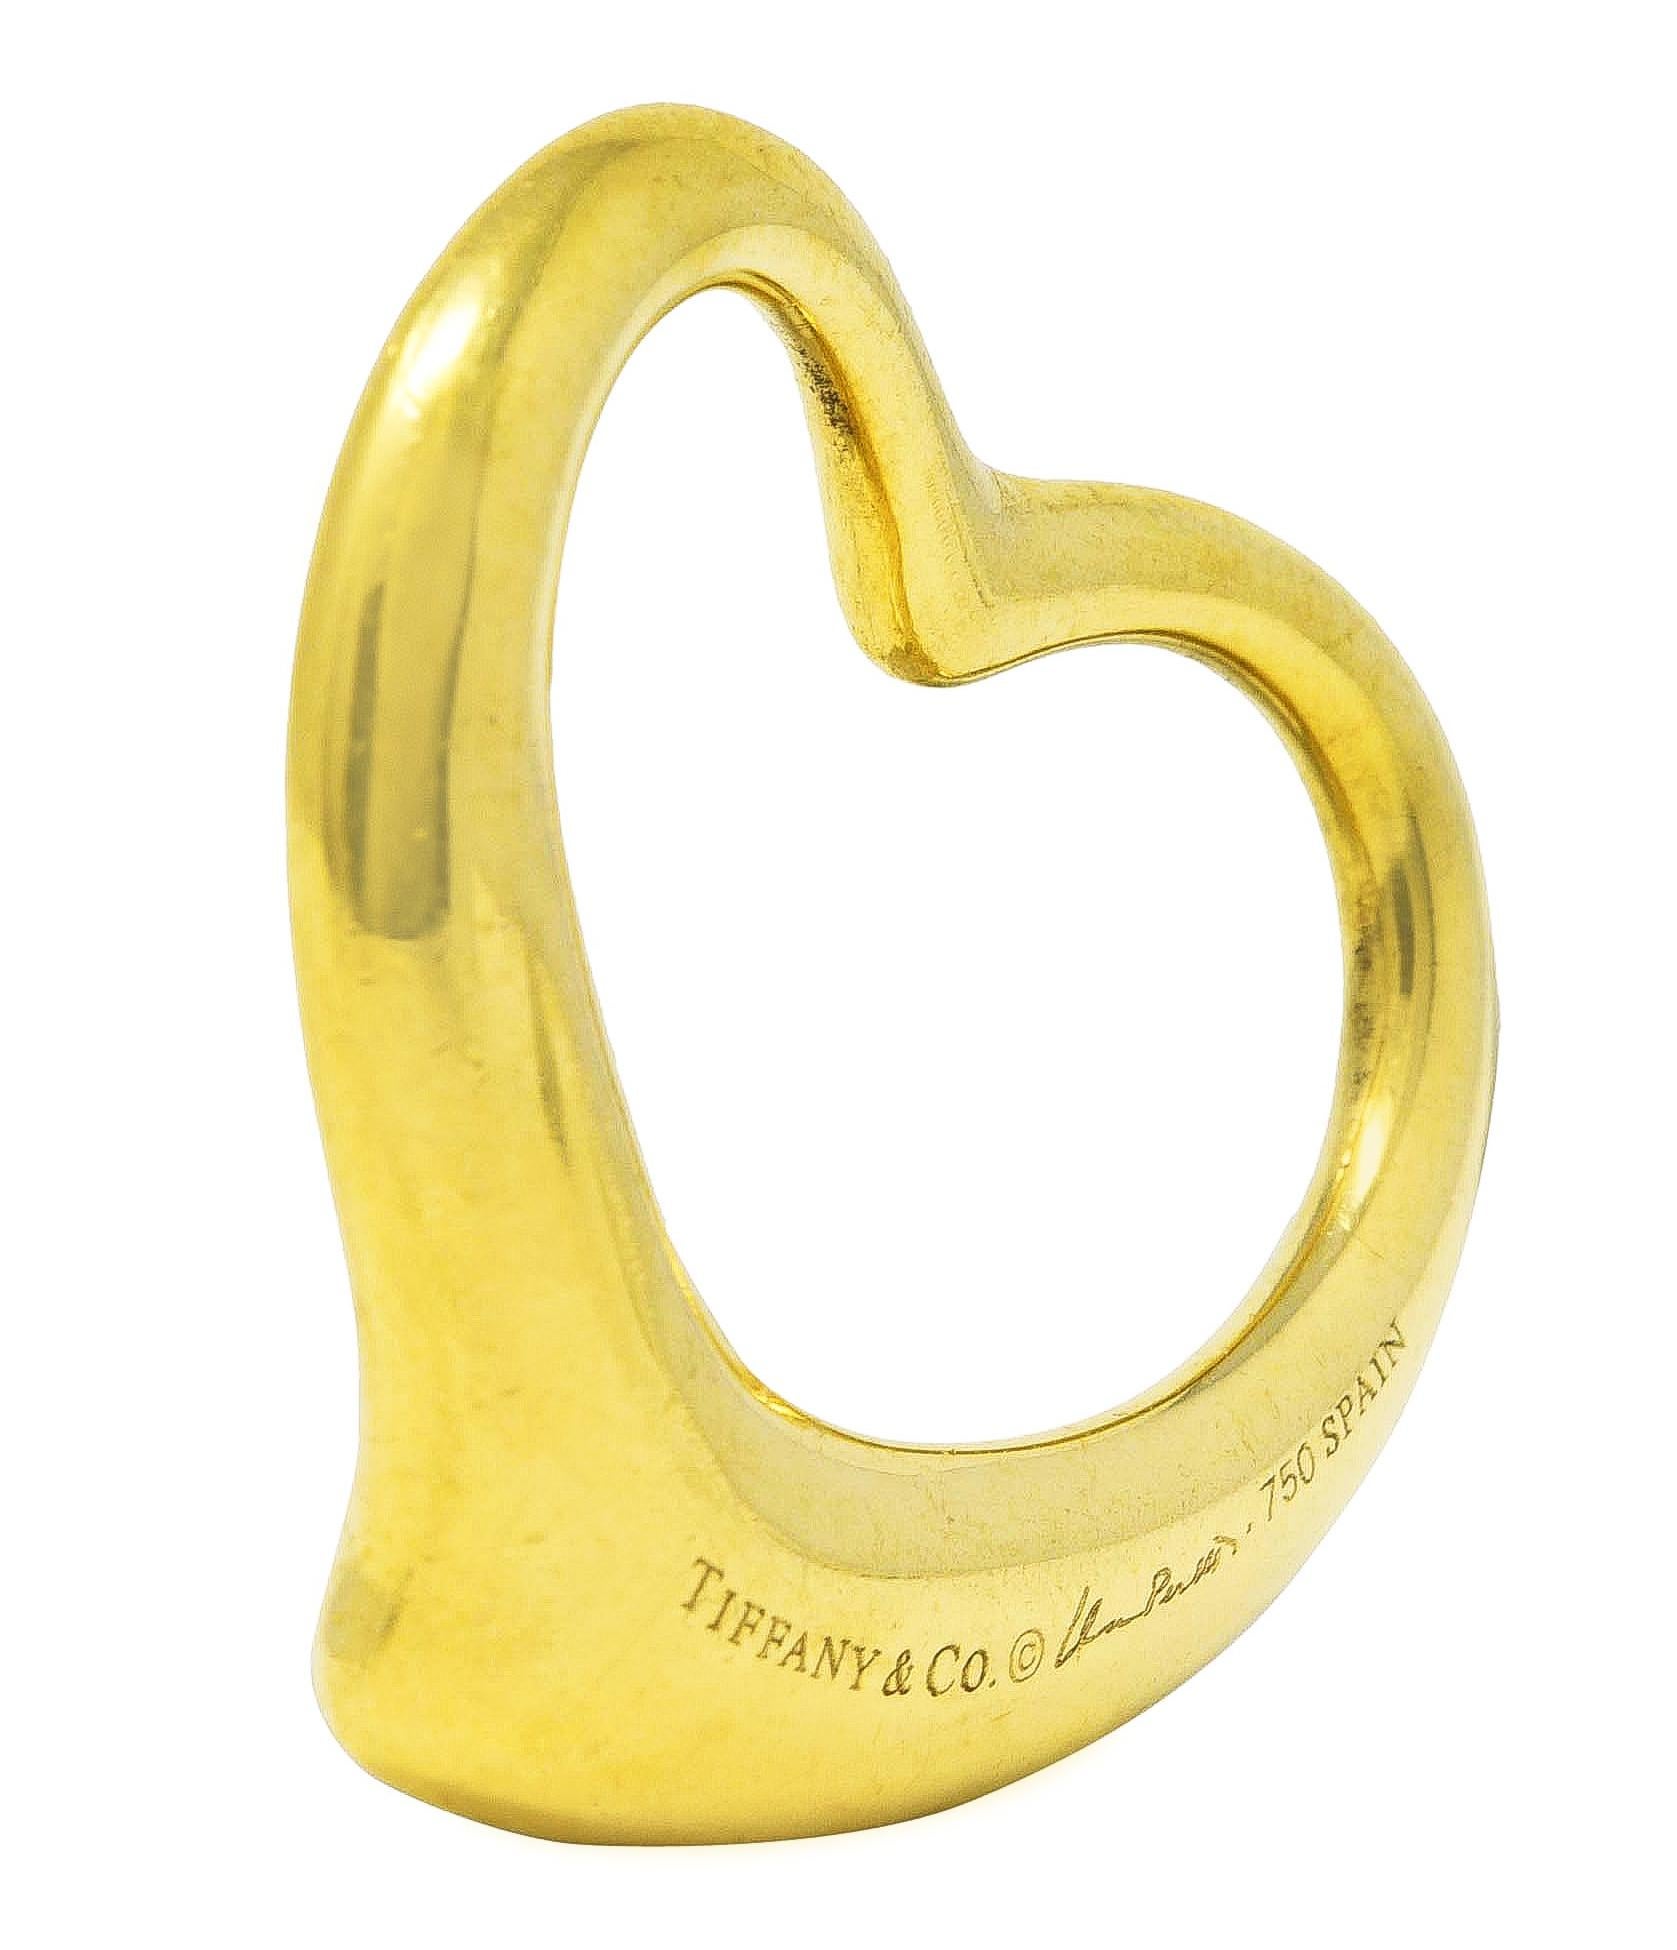 Pendant is designed as the stylized outline of a heart. With flowing contoured gold and a high polished finish. Stamped 750 for 18 karat gold. Fully signed Elsa Peretti Tiffany & Co. Spain. Circa: Late 20th century. Measures: 1 1/4 x 1 3/8 inches.